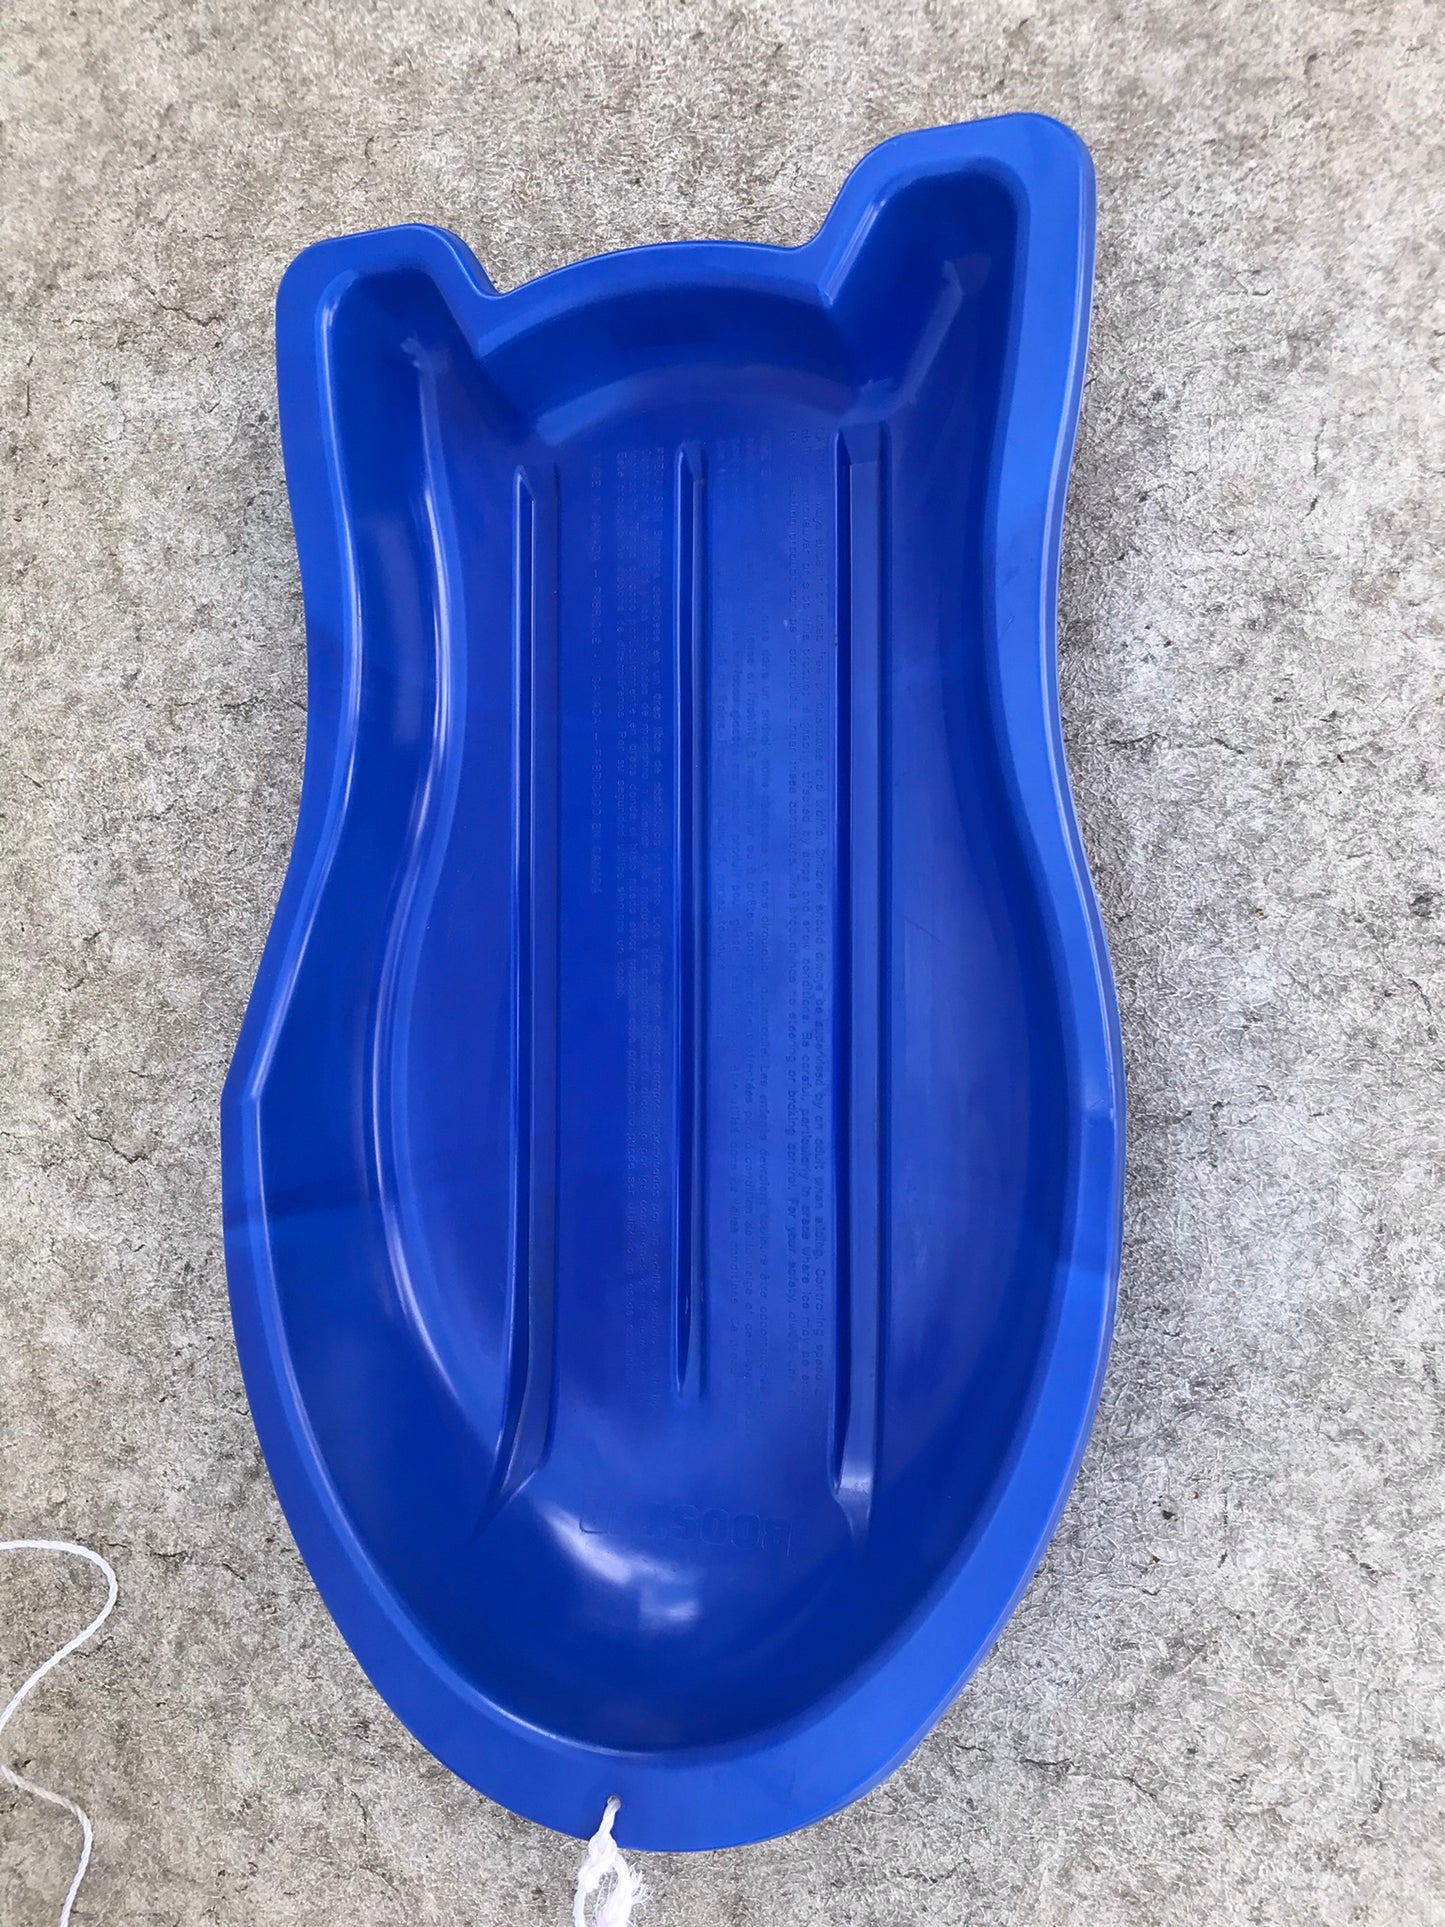 Snow Sled Super Booster Adventurer 1 Person Blue Plastic Snow Sled Child Age 5-14 38 Inch Made In Canada Excellent